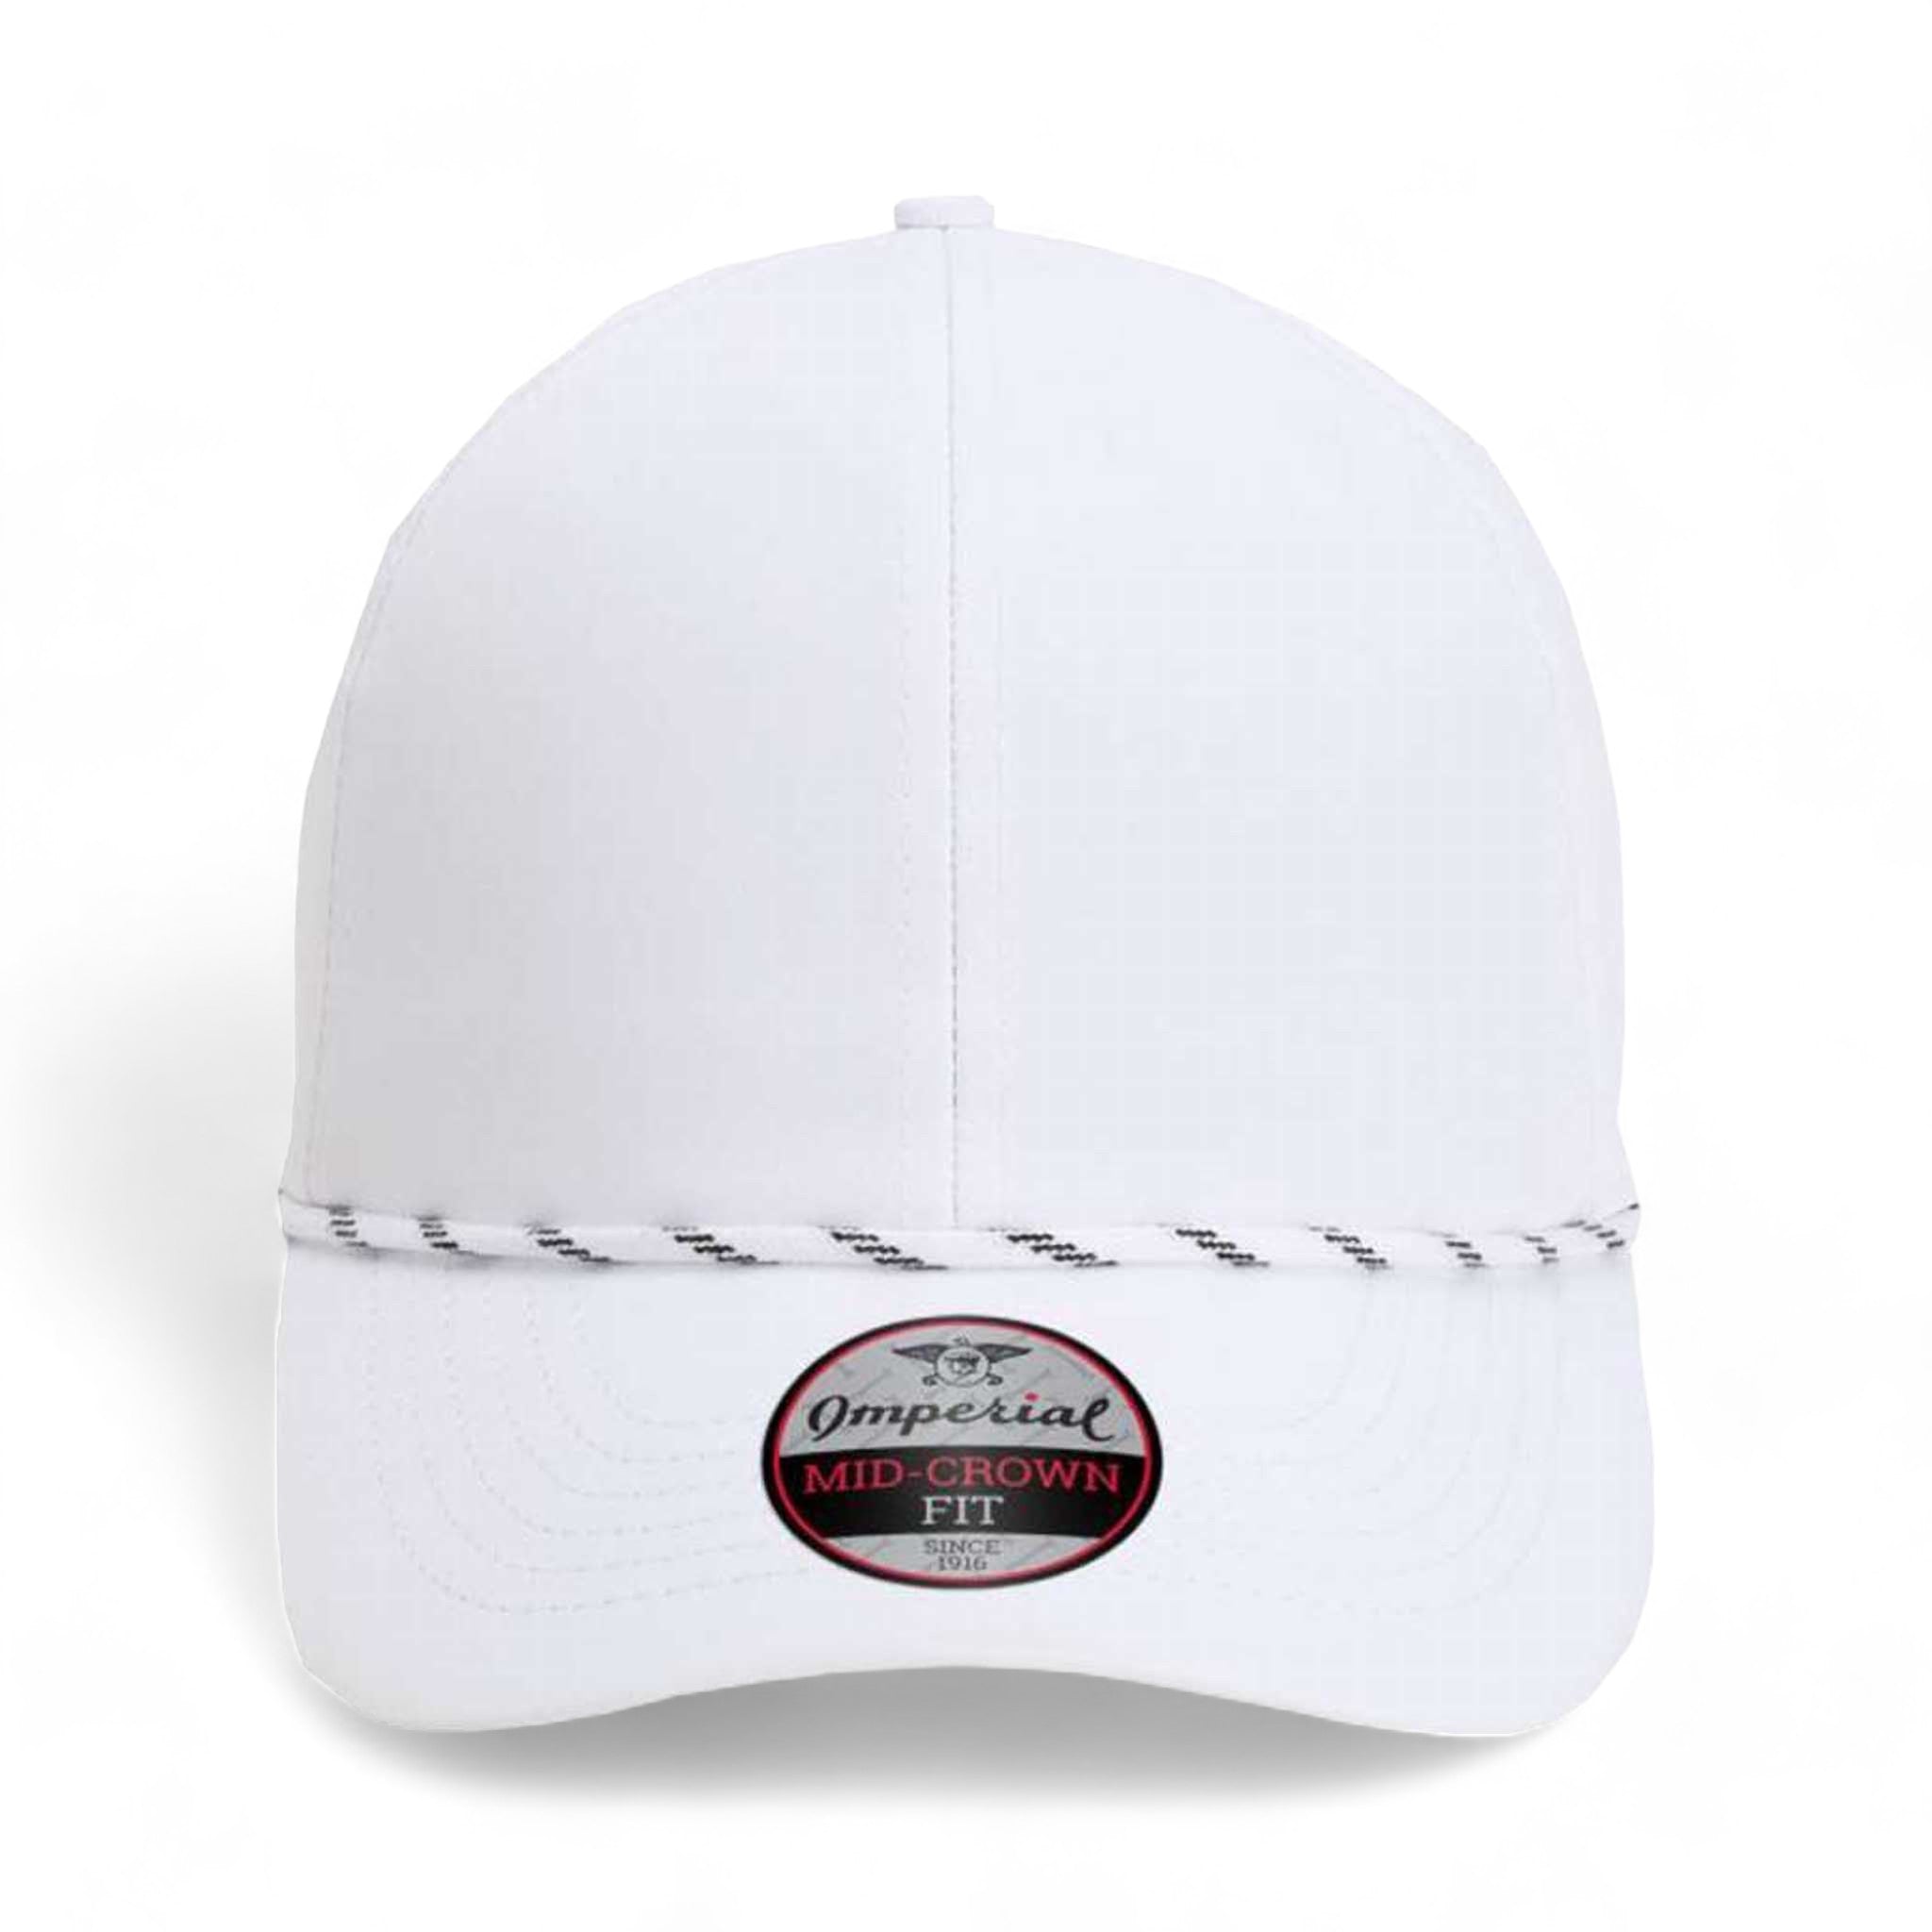 Front view of Imperial 6054 custom hat in white